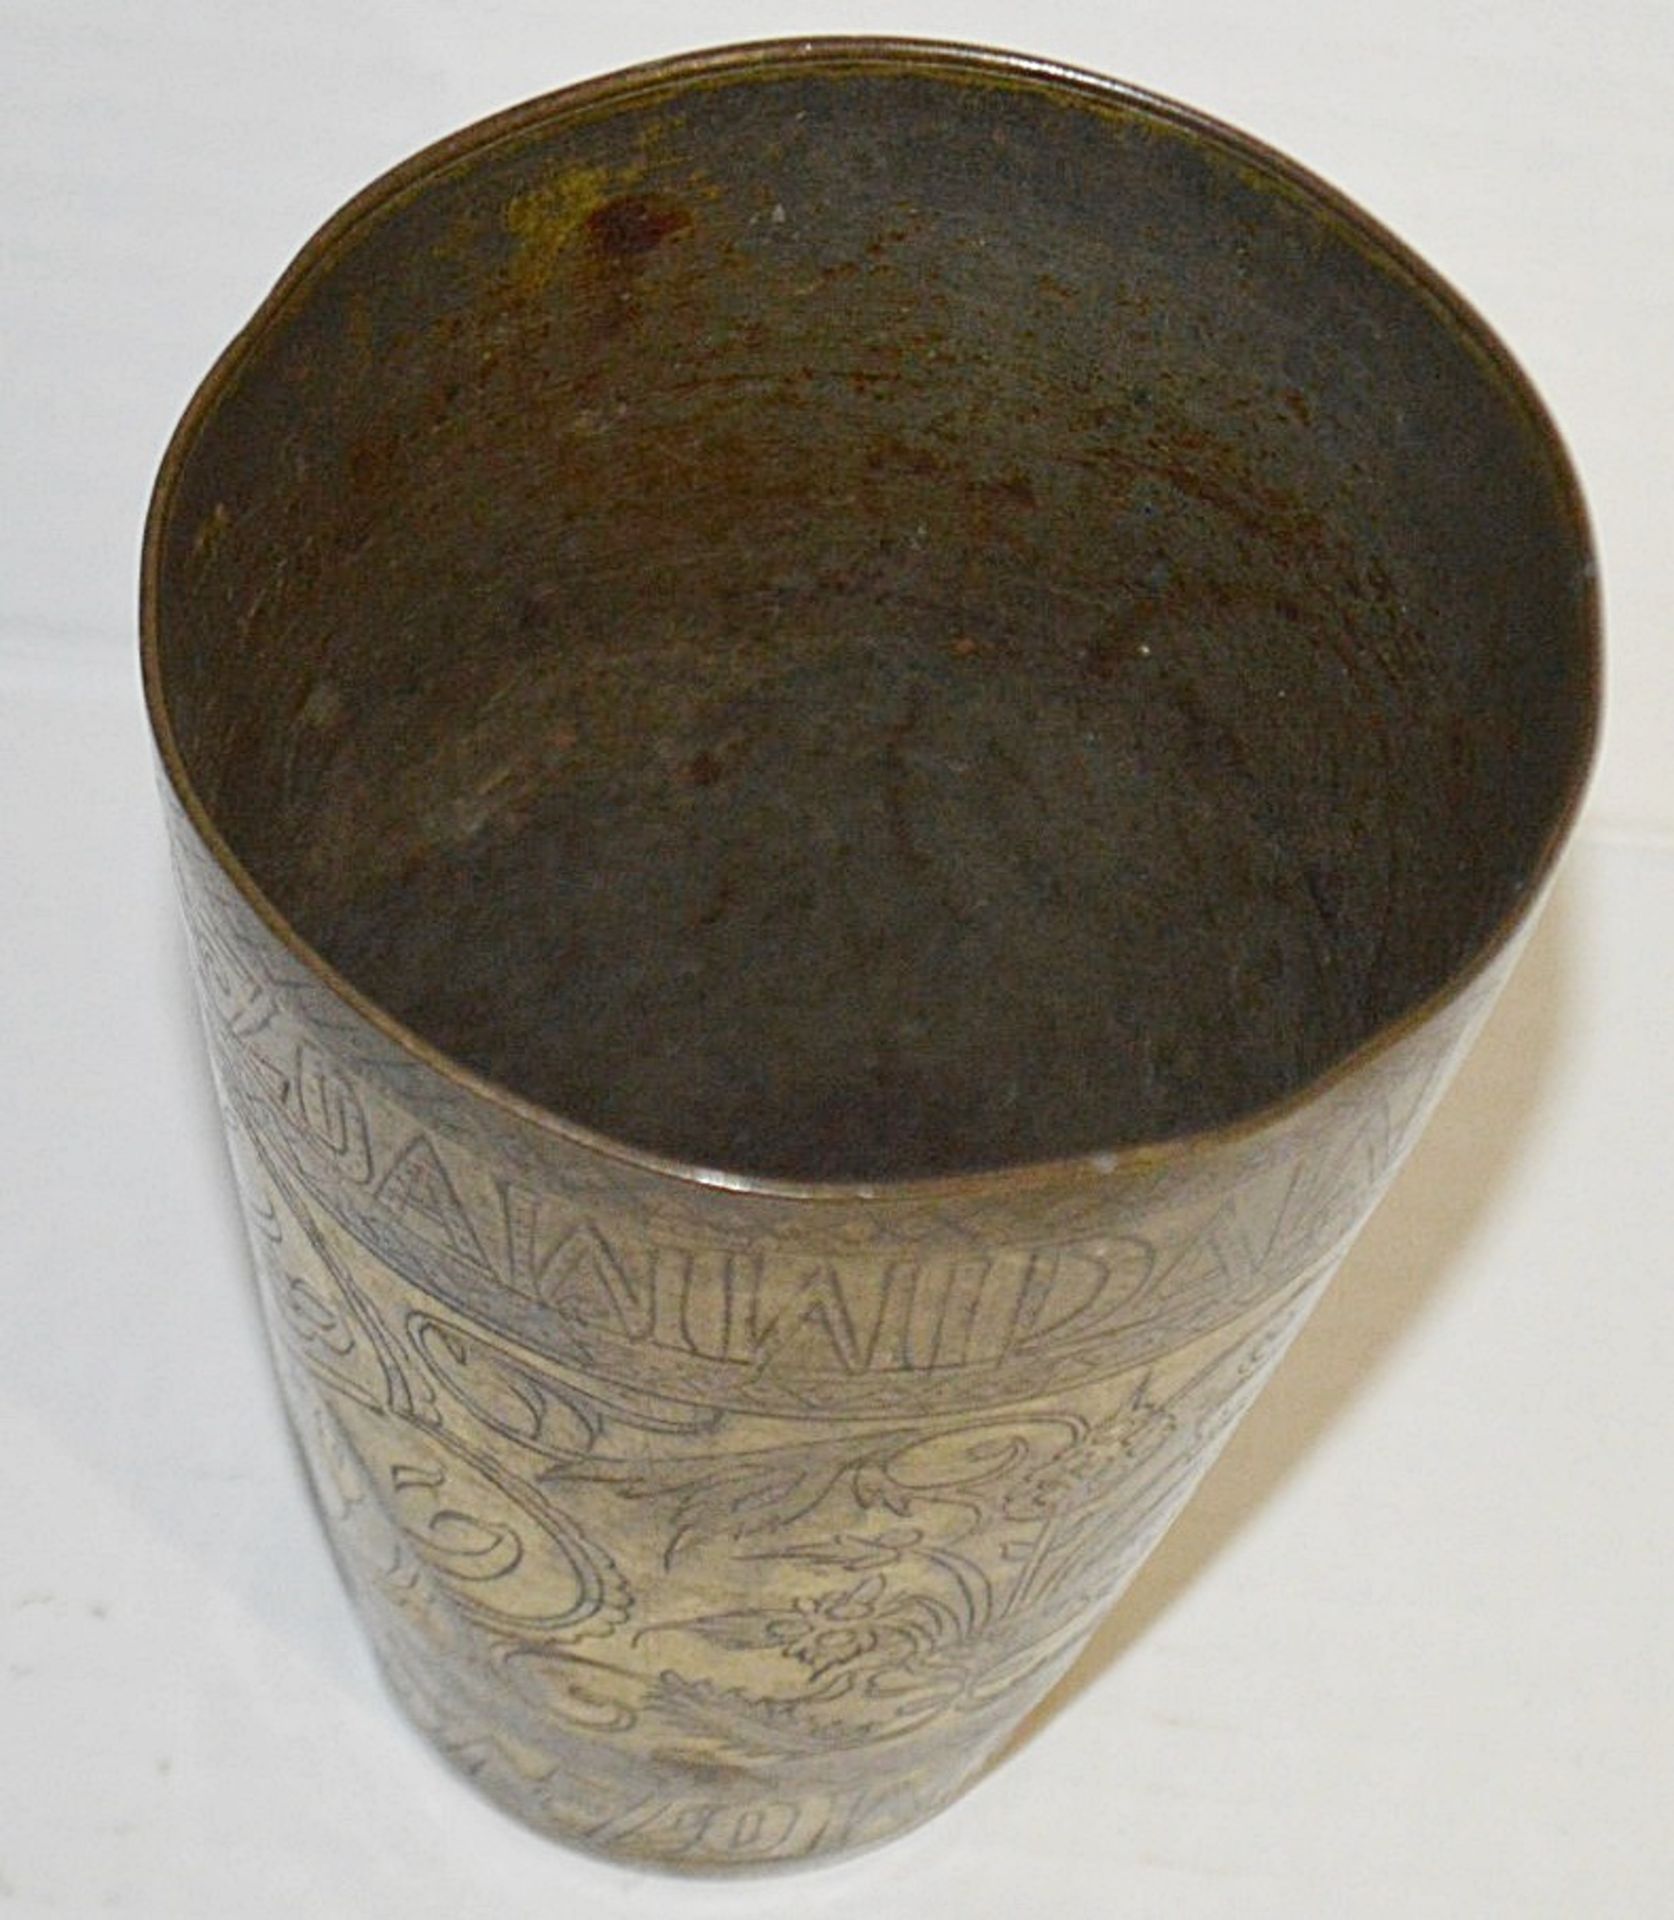 1 x Persian Gilded Tinner Beaker - Decorated With Floral Design And Scripture - Height: 14.5cm (5. - Image 5 of 6